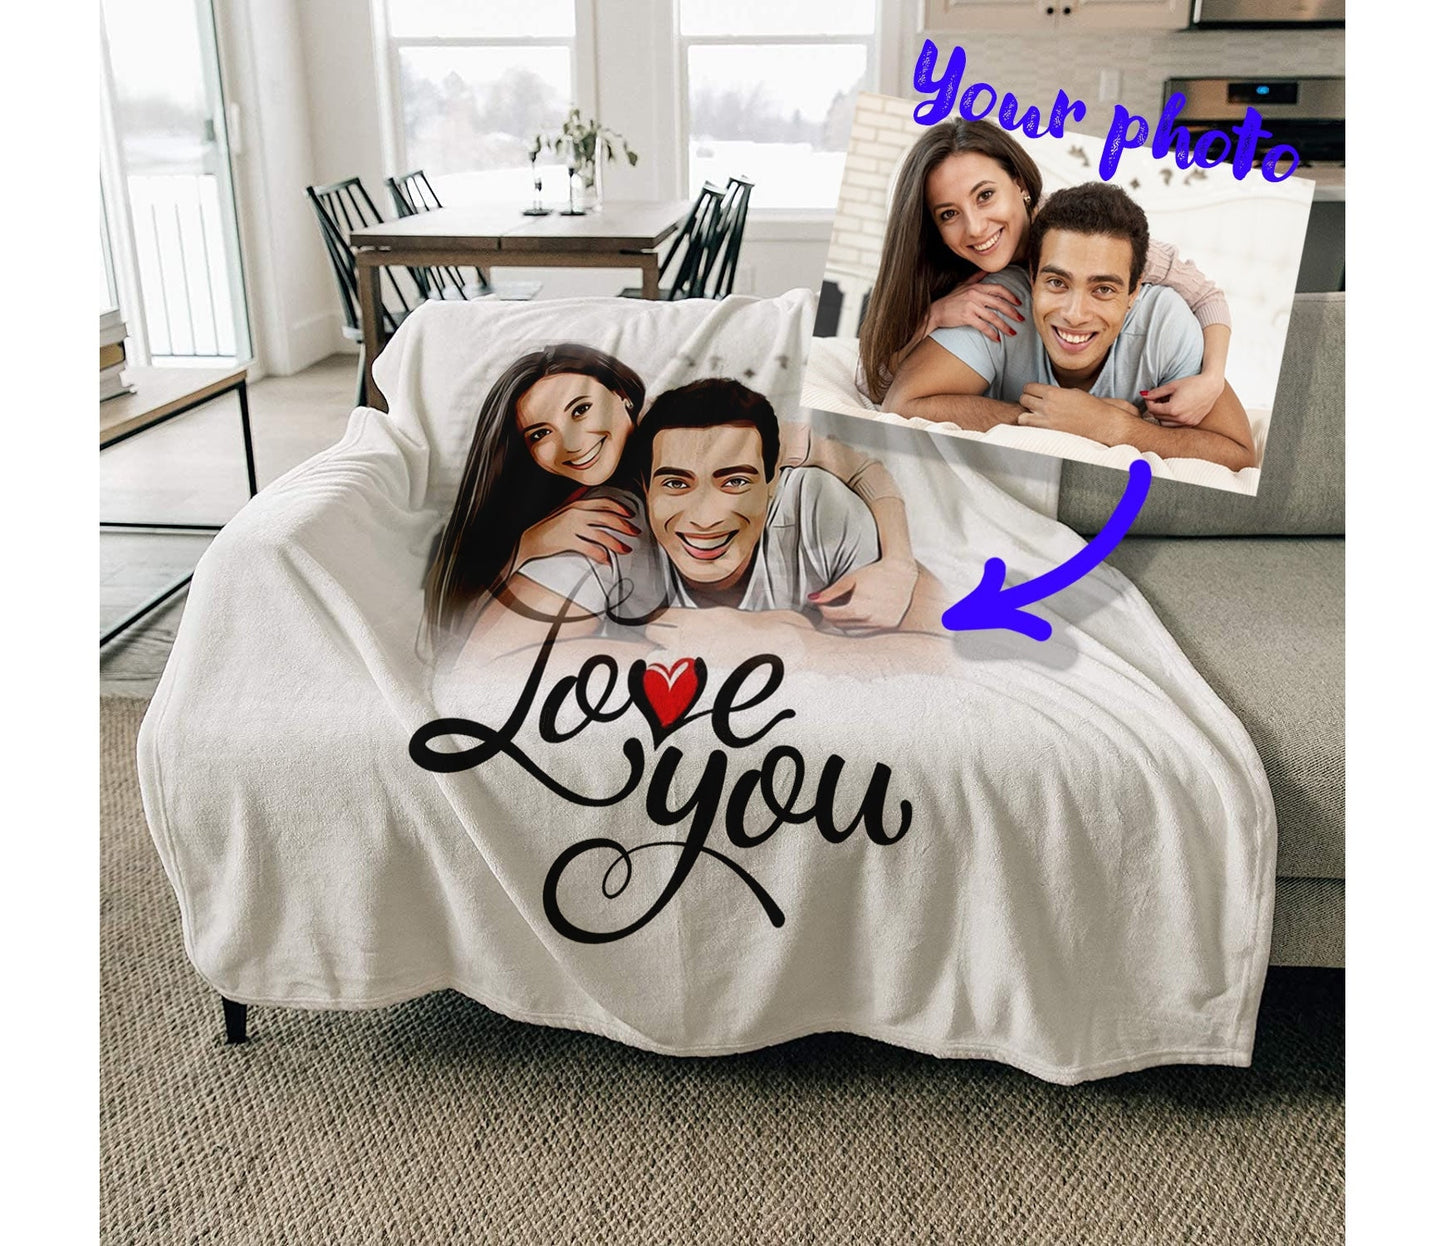 Custom Couple Photo Blanket Personalized With A Photo,  Comfy Picture Blanket Also Great For Picnics And Beach. Photo Blanket Customized